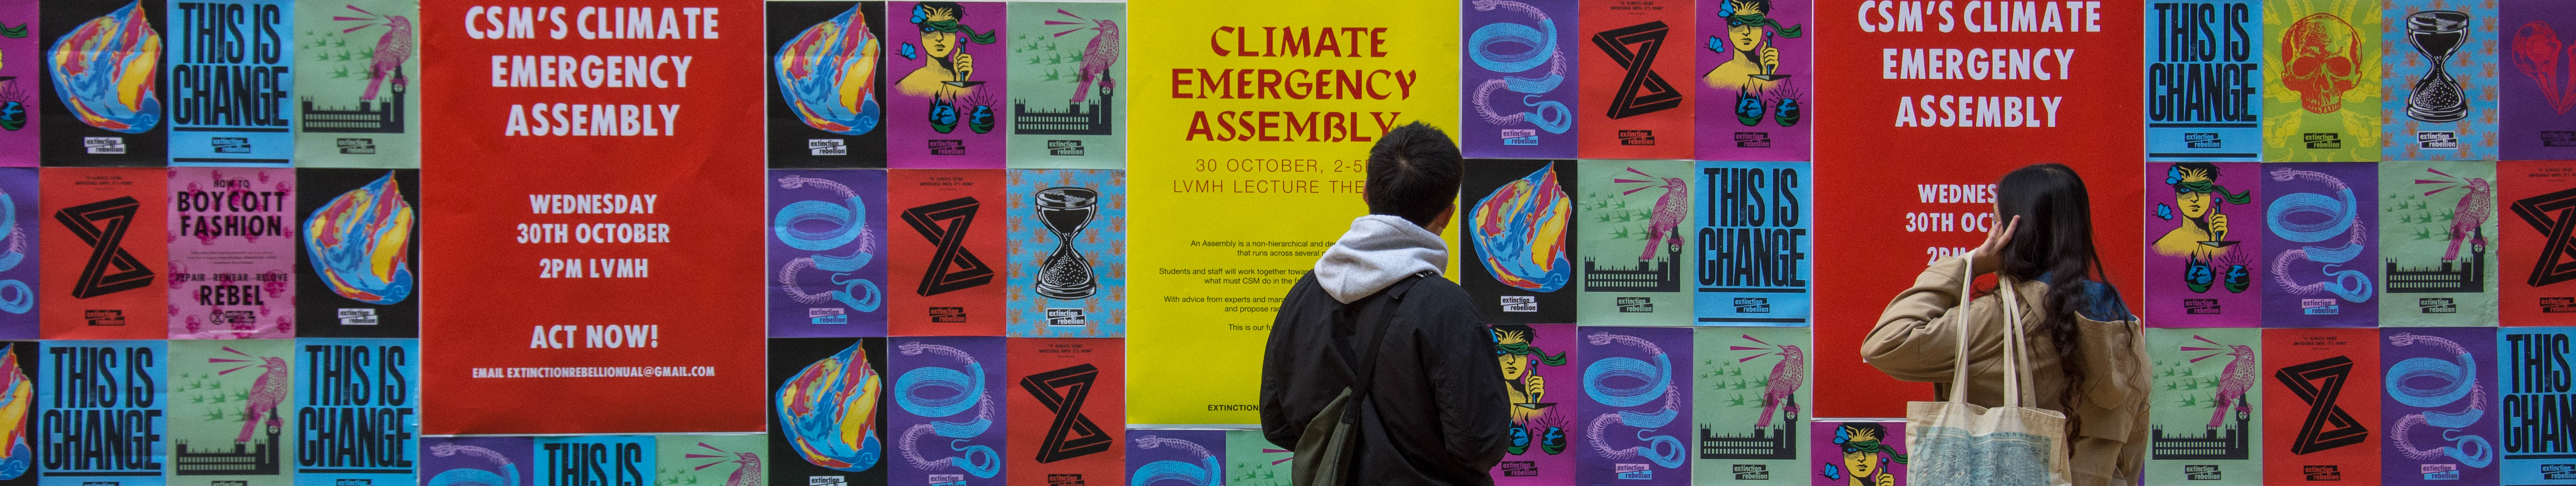 Climate Emergency Posters pinned to wall